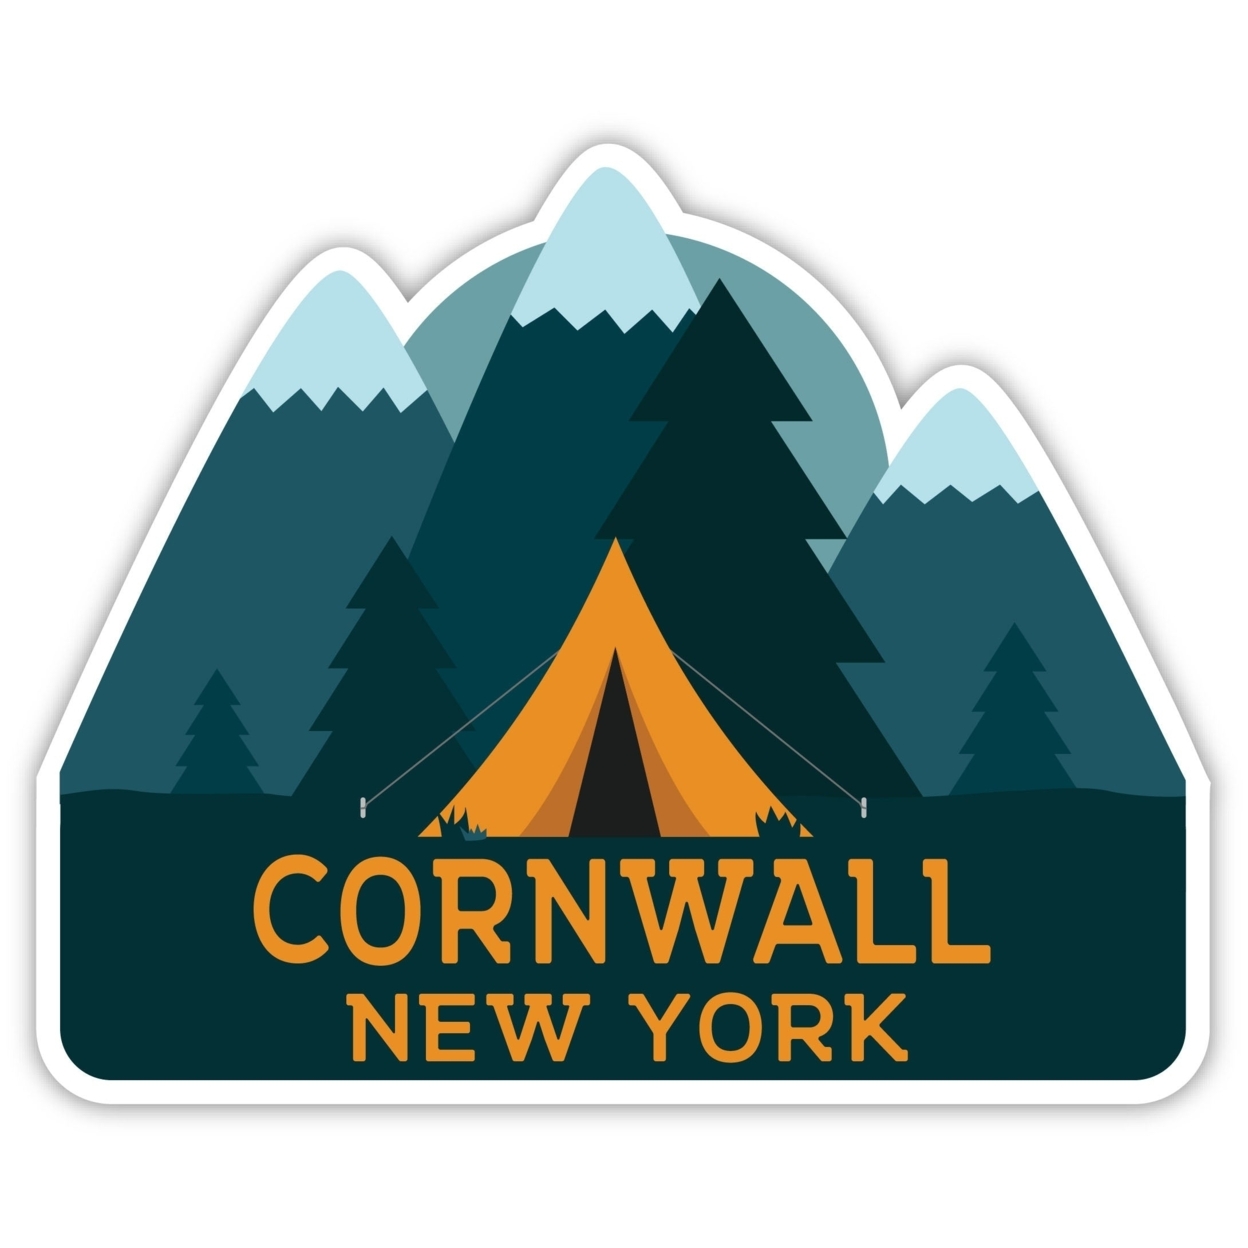 Cornwall New York Souvenir Decorative Stickers (Choose Theme And Size) - Single Unit, 2-Inch, Tent